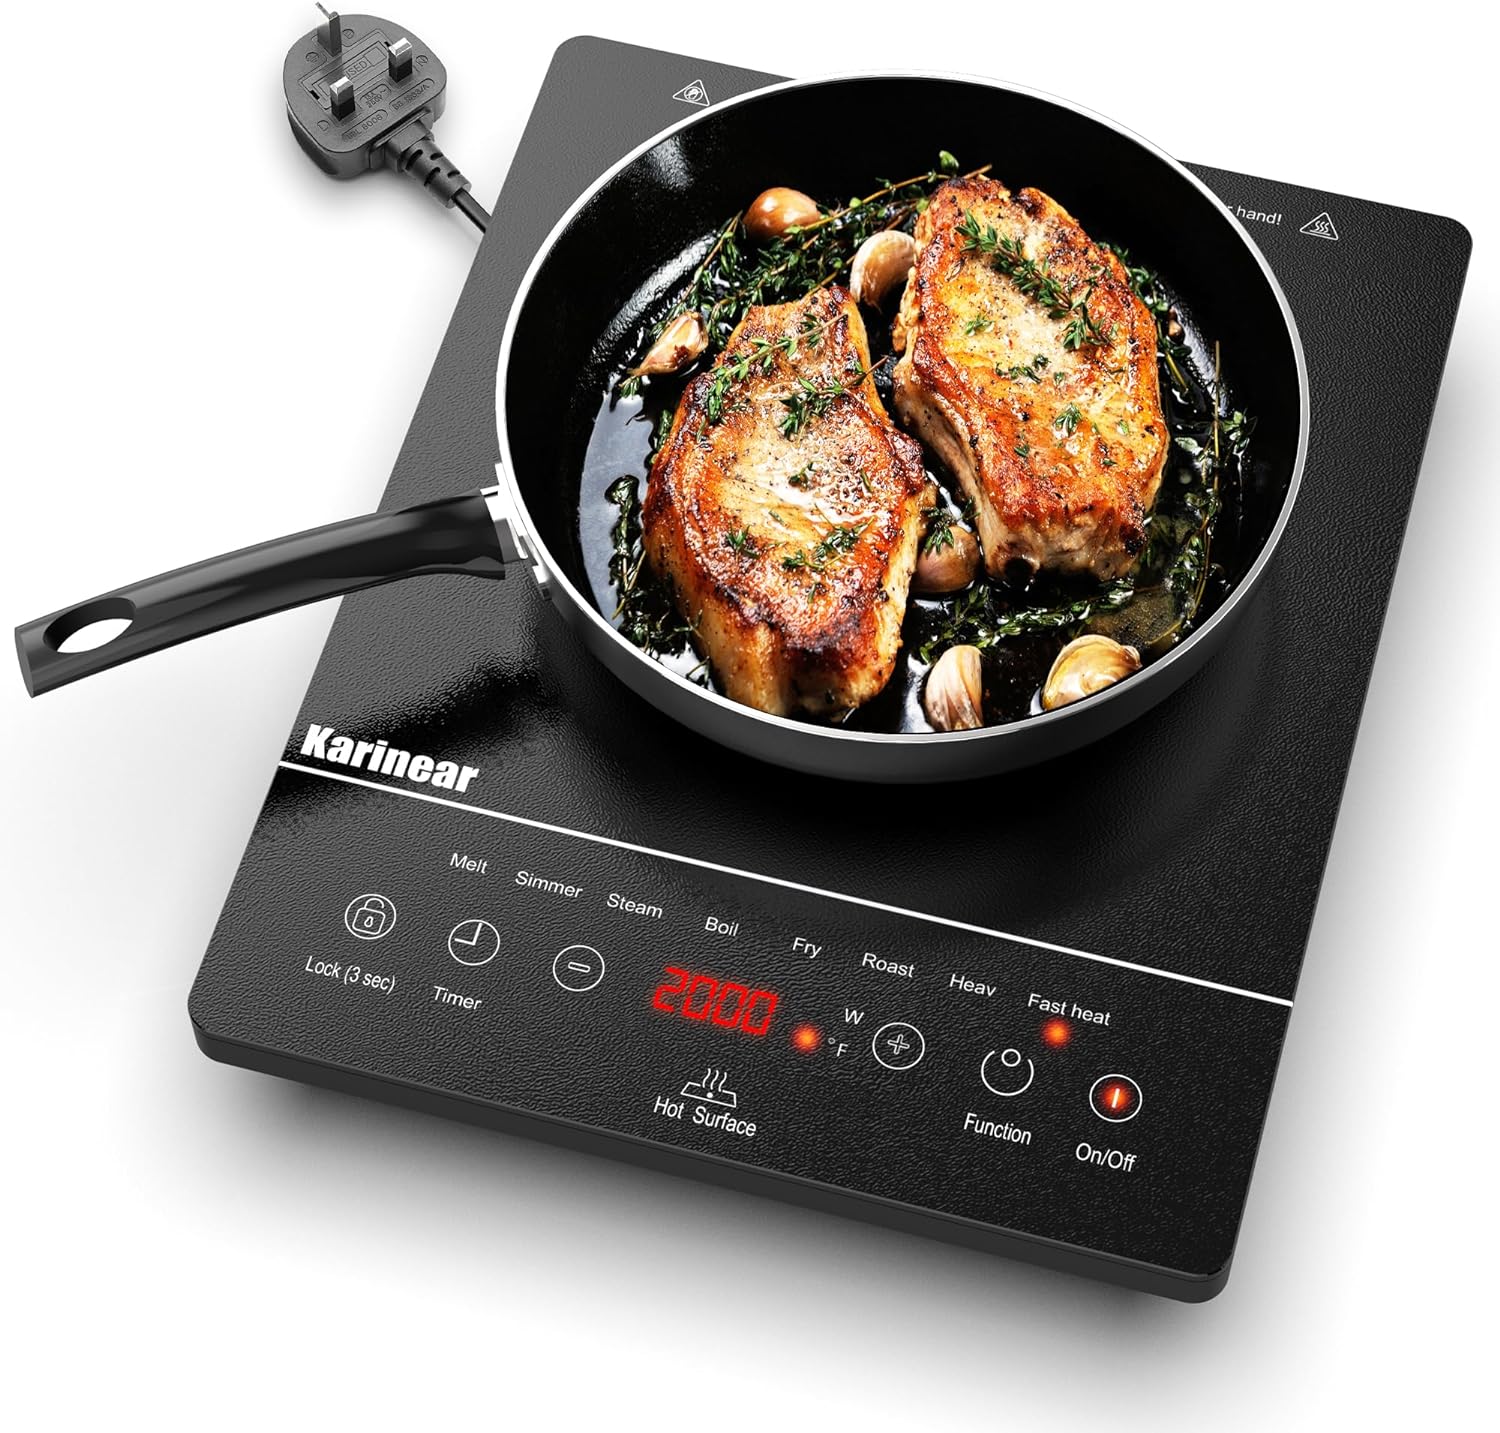 Karinear Electric Cooktop 24 Inch, 4 Burners Built-in Electric StoveTop  with Marble Patterned Surface, Ceramic Cooktop with Child Lock, Timer,  Residual Heat Indicator, 220-240v Hard Wired, Wiring Required(LH07)